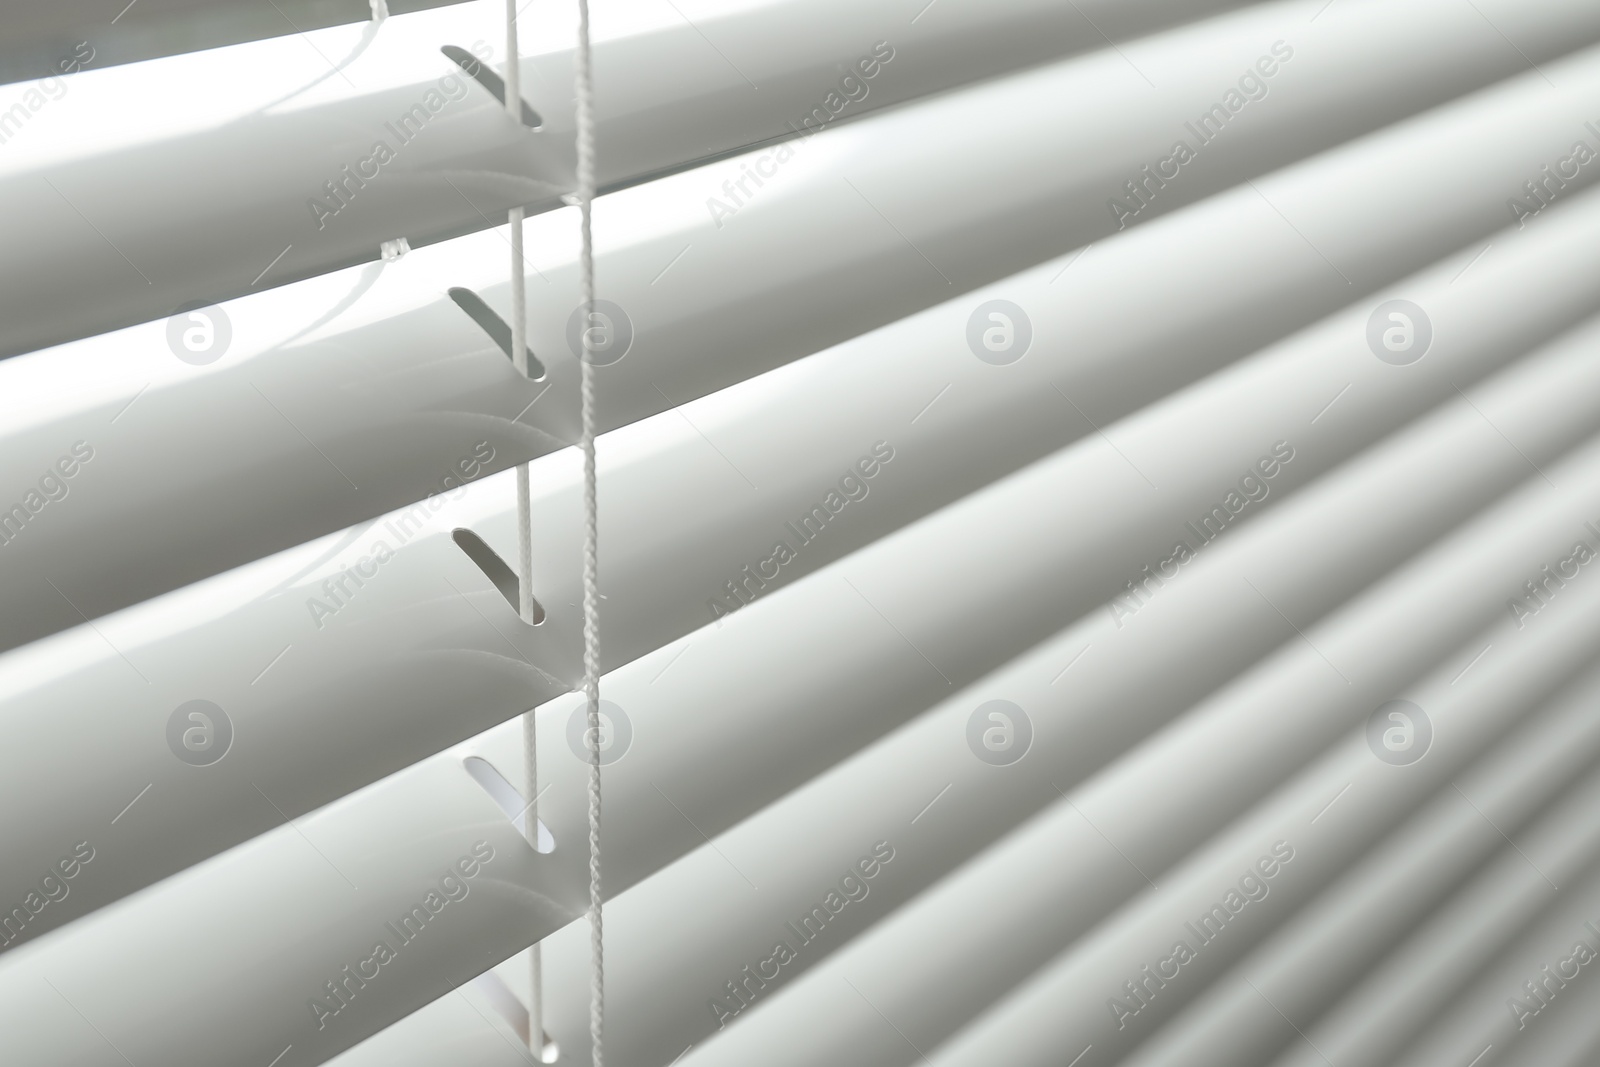 Photo of Closeup view of window with horizontal blinds